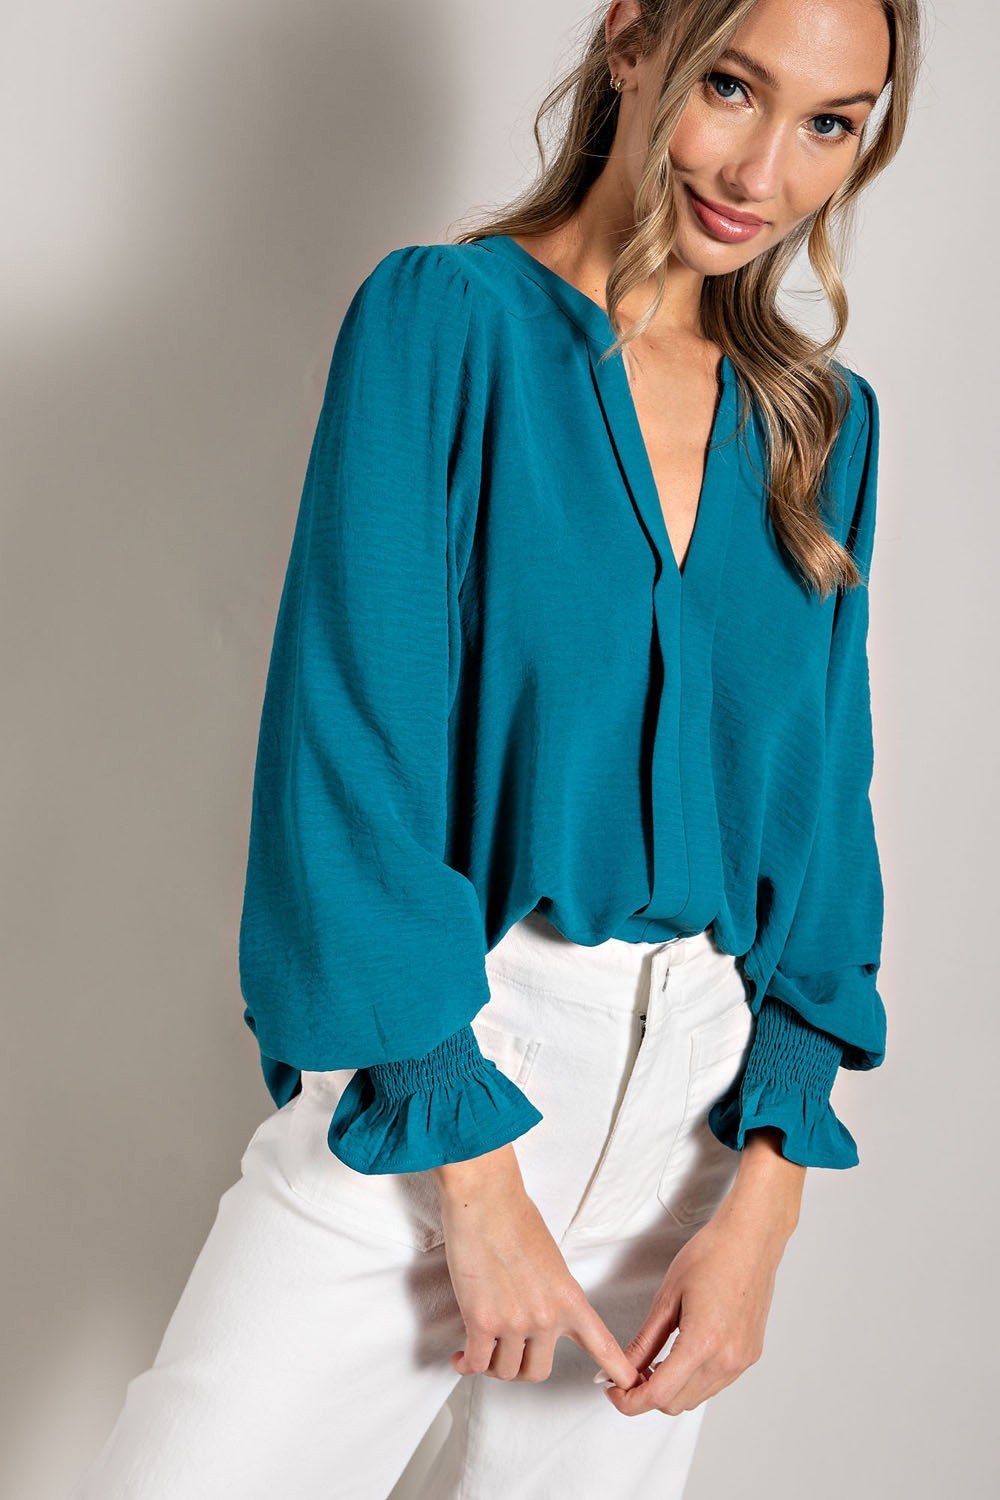 Teal Smocked Cuff Top